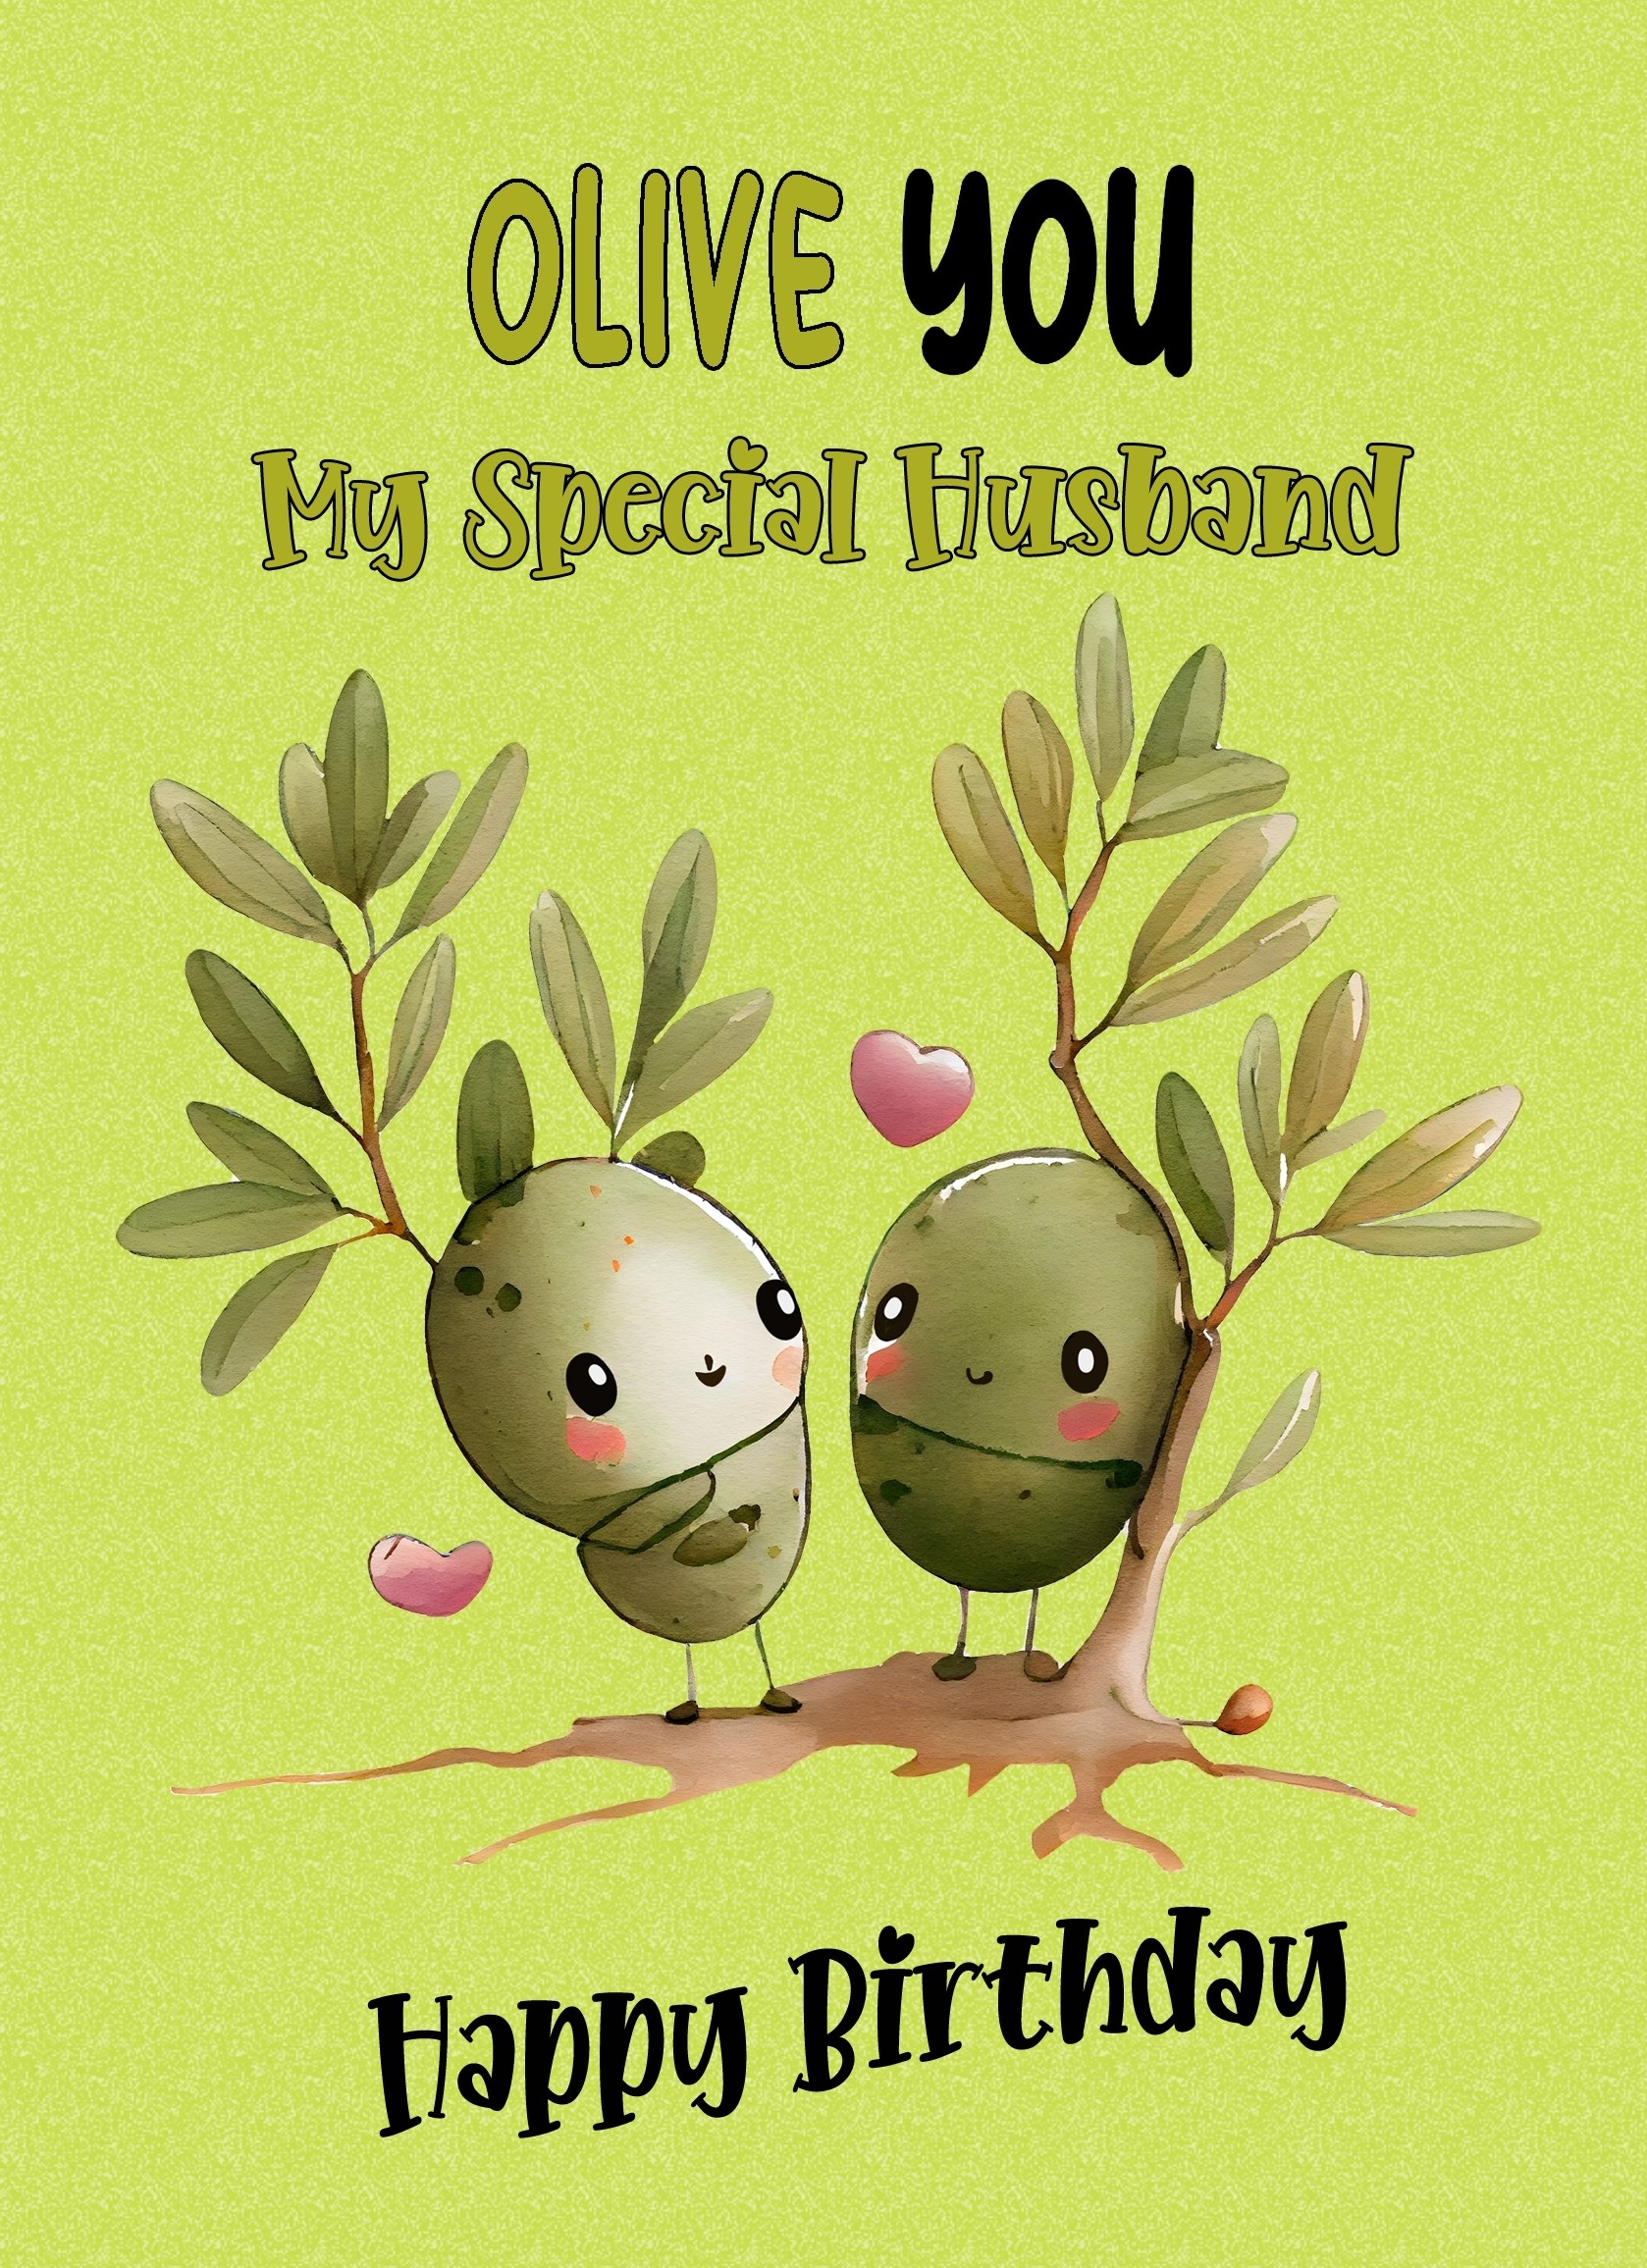 Funny Pun Romantic Birthday Card for Husband (Olive You)